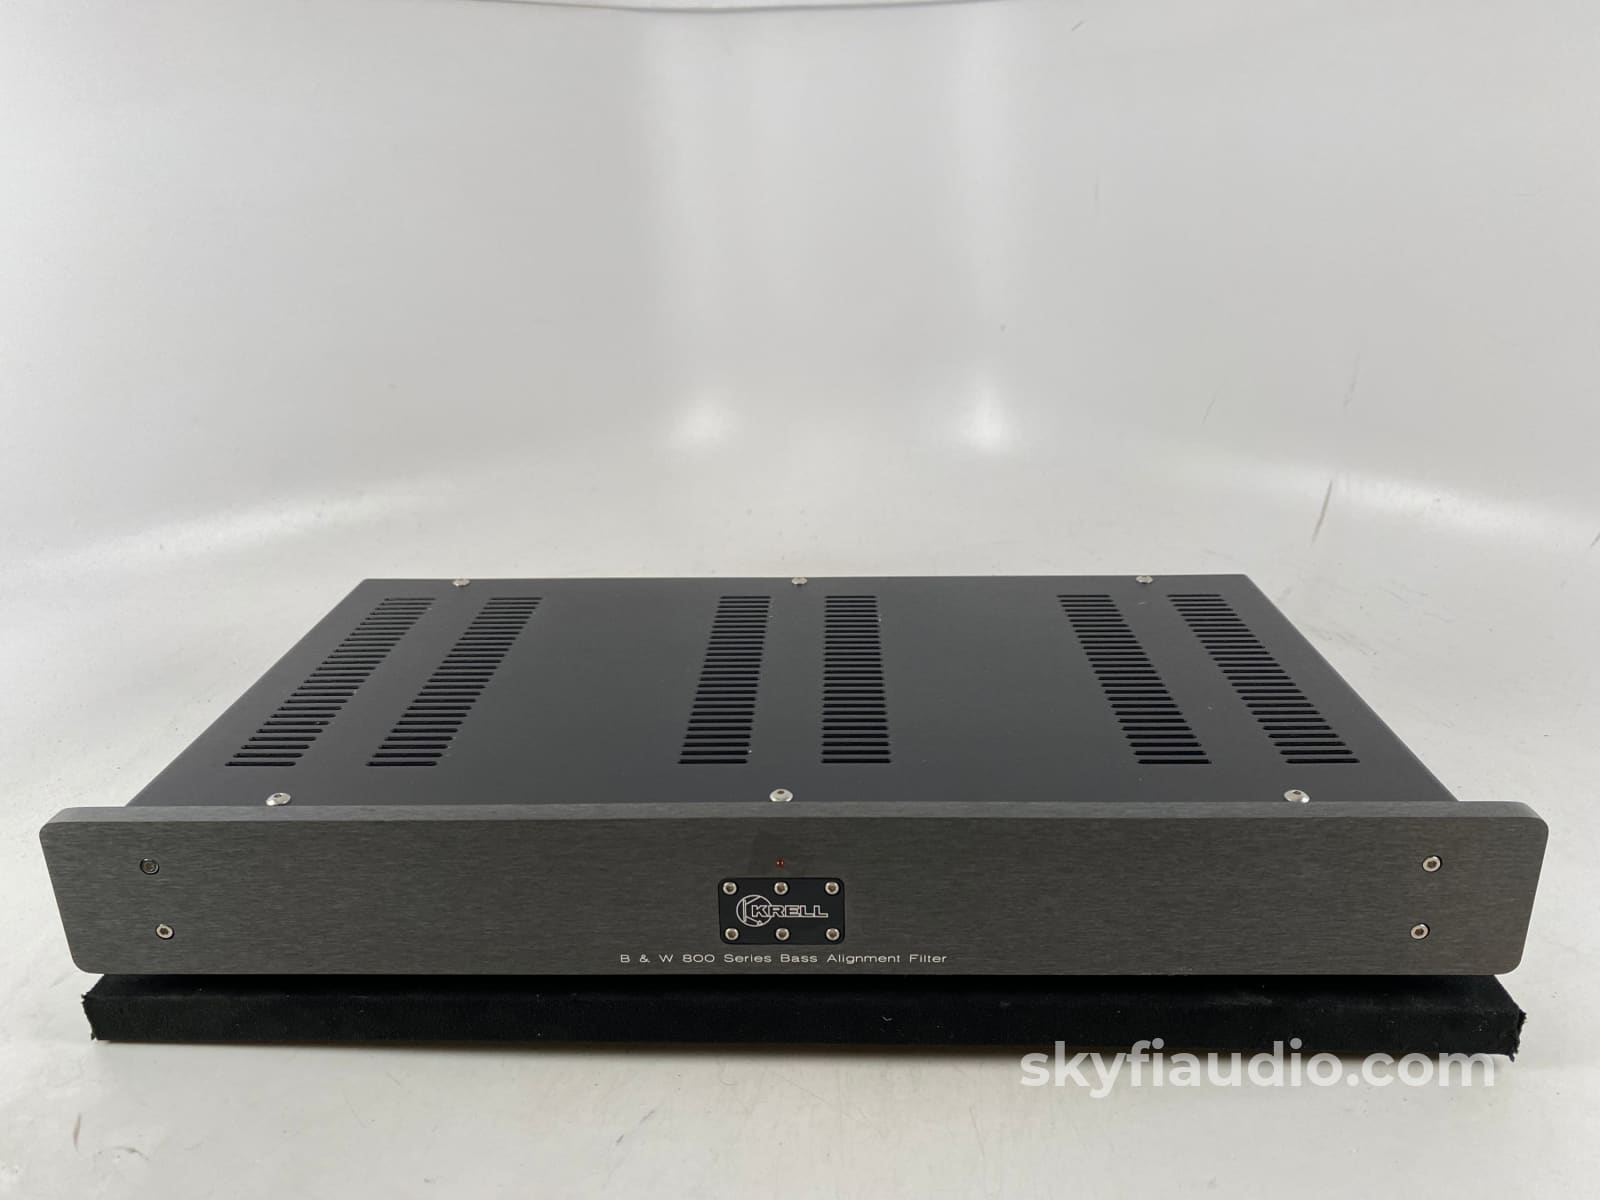 Krell Bass Alignment Filter For Bowers & Wilkins Matrix 800 Series Speakers - Rare Equalizer